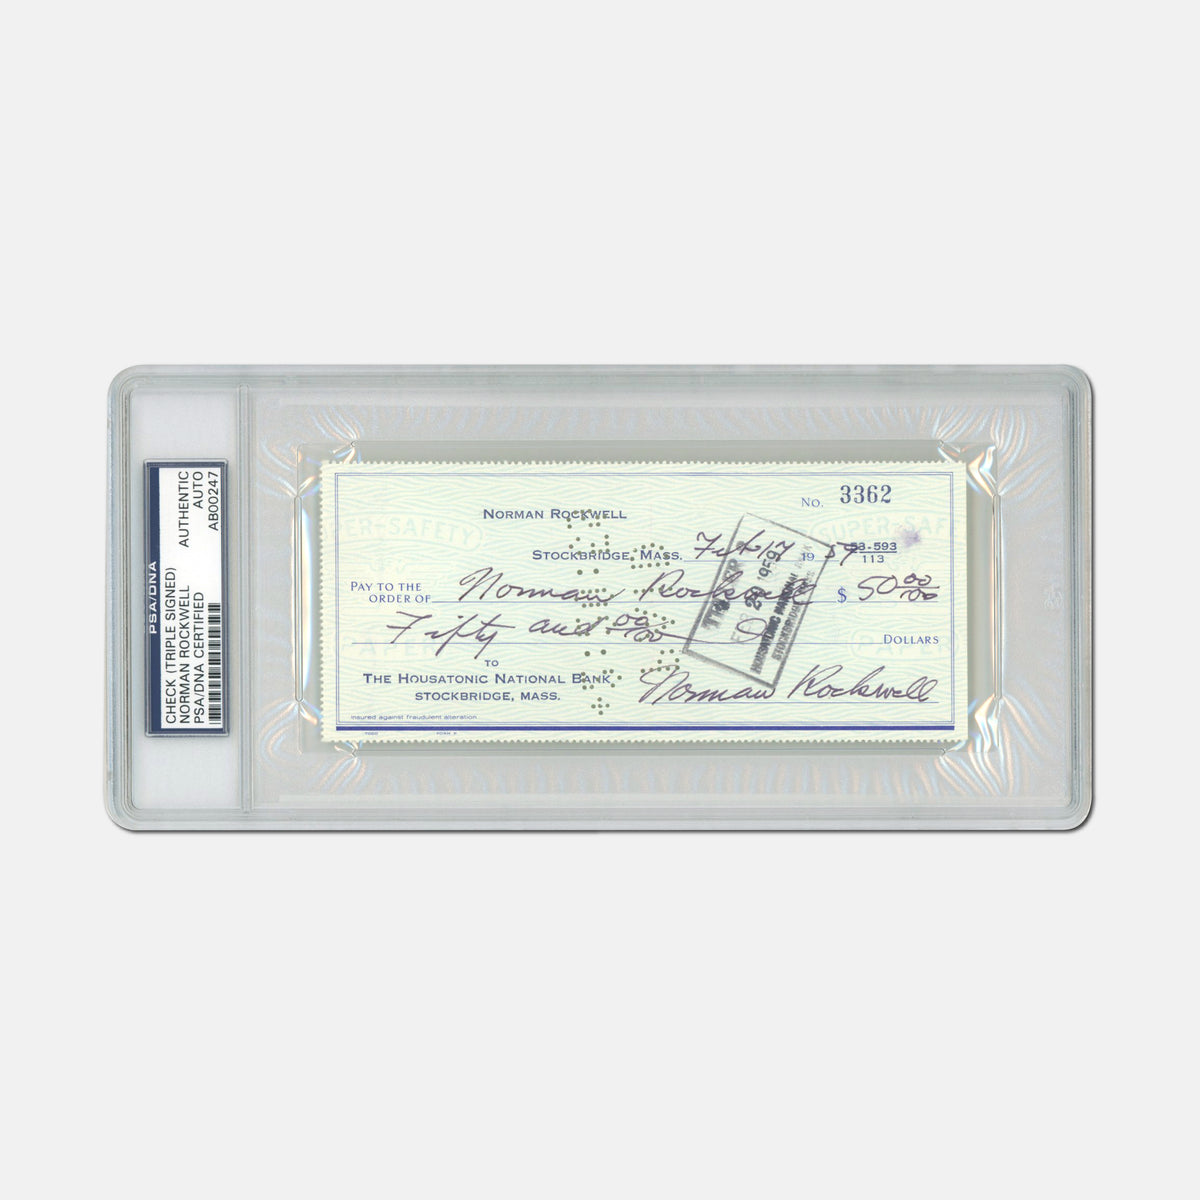 Norman Rockwell - 3 x Signed Personal Check, 1959 - PSA Slabbed